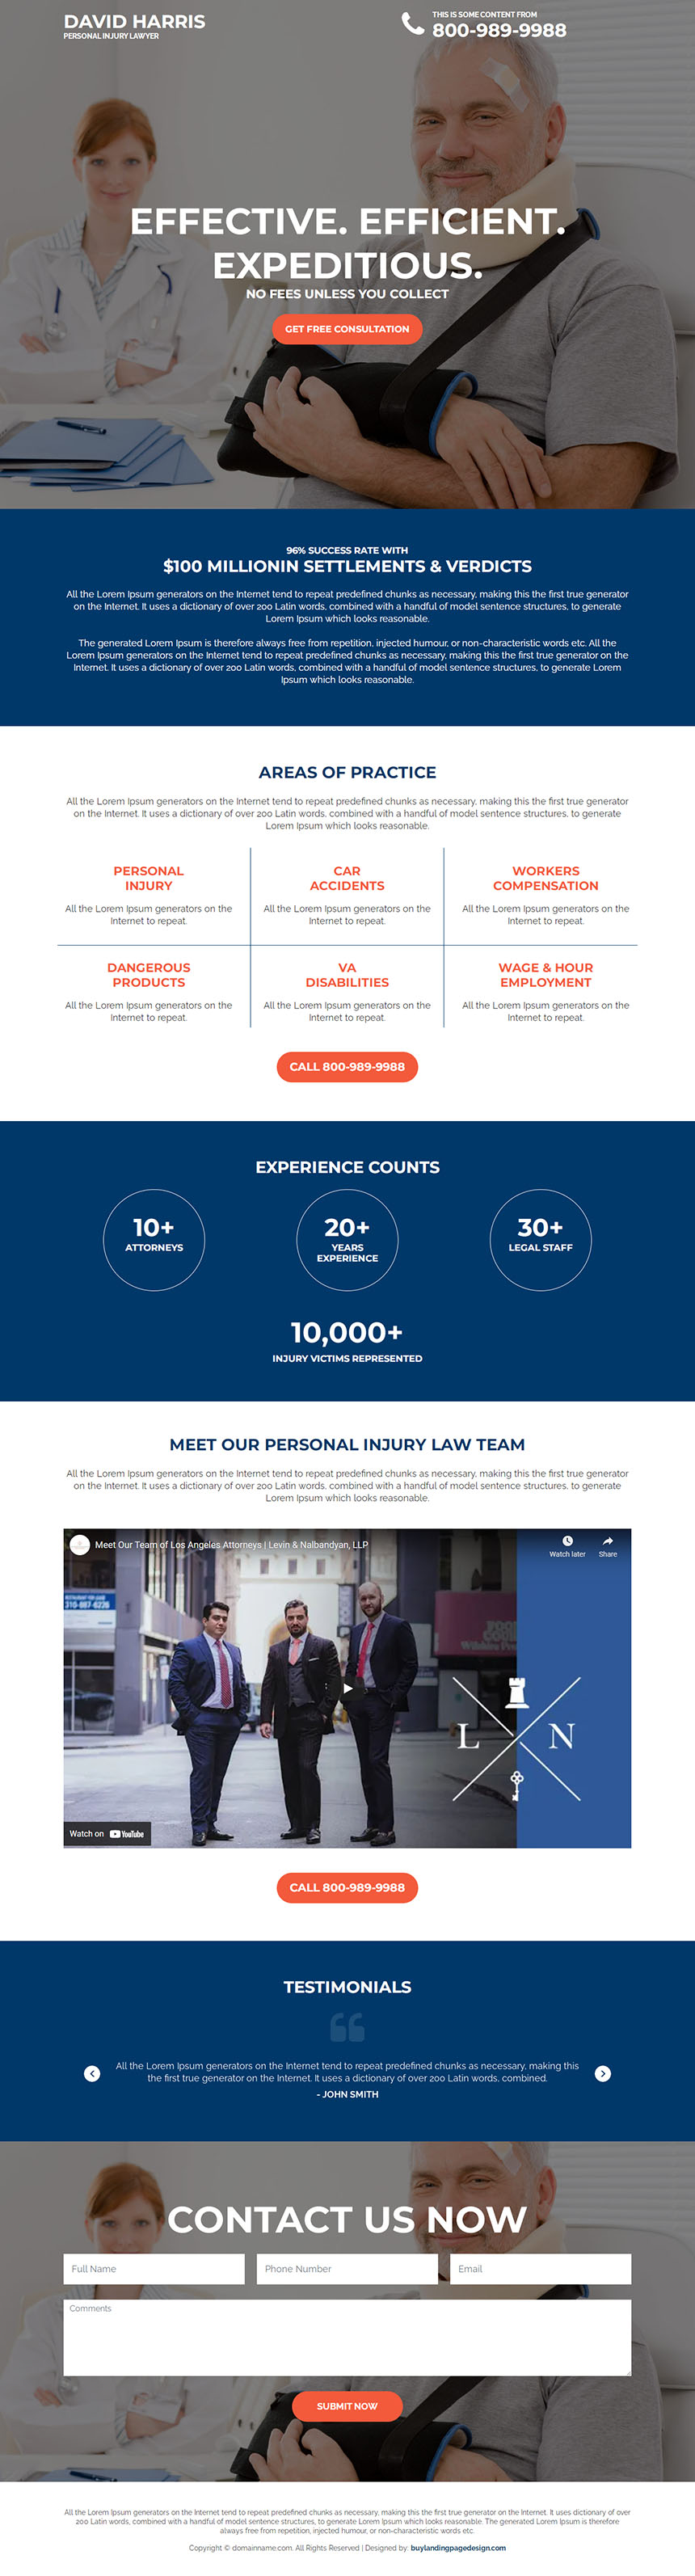 personal injury lawyers responsive landing page design